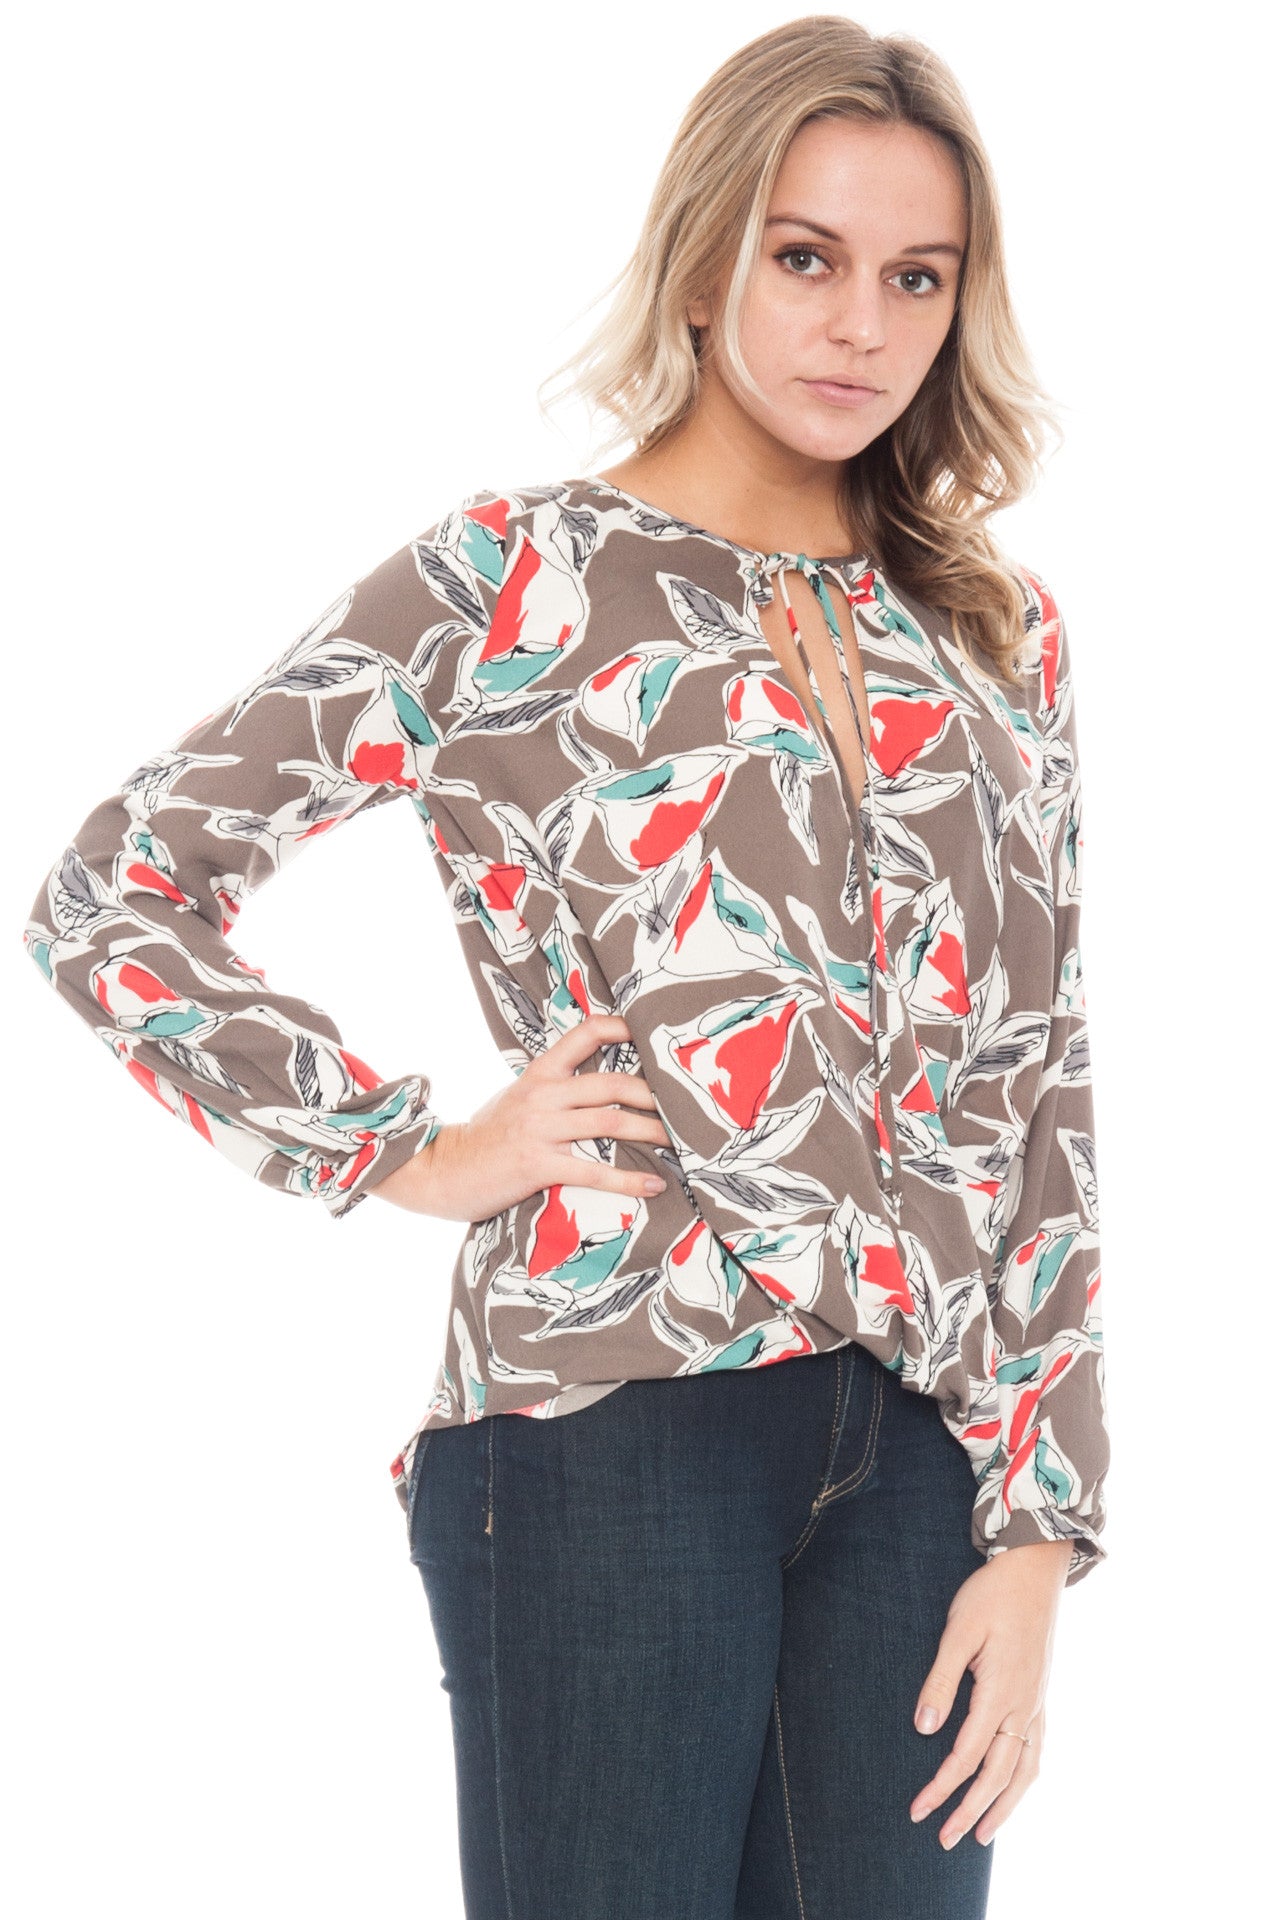 Blouse - Overlap Front Printed Top with Neck Tie By Lush